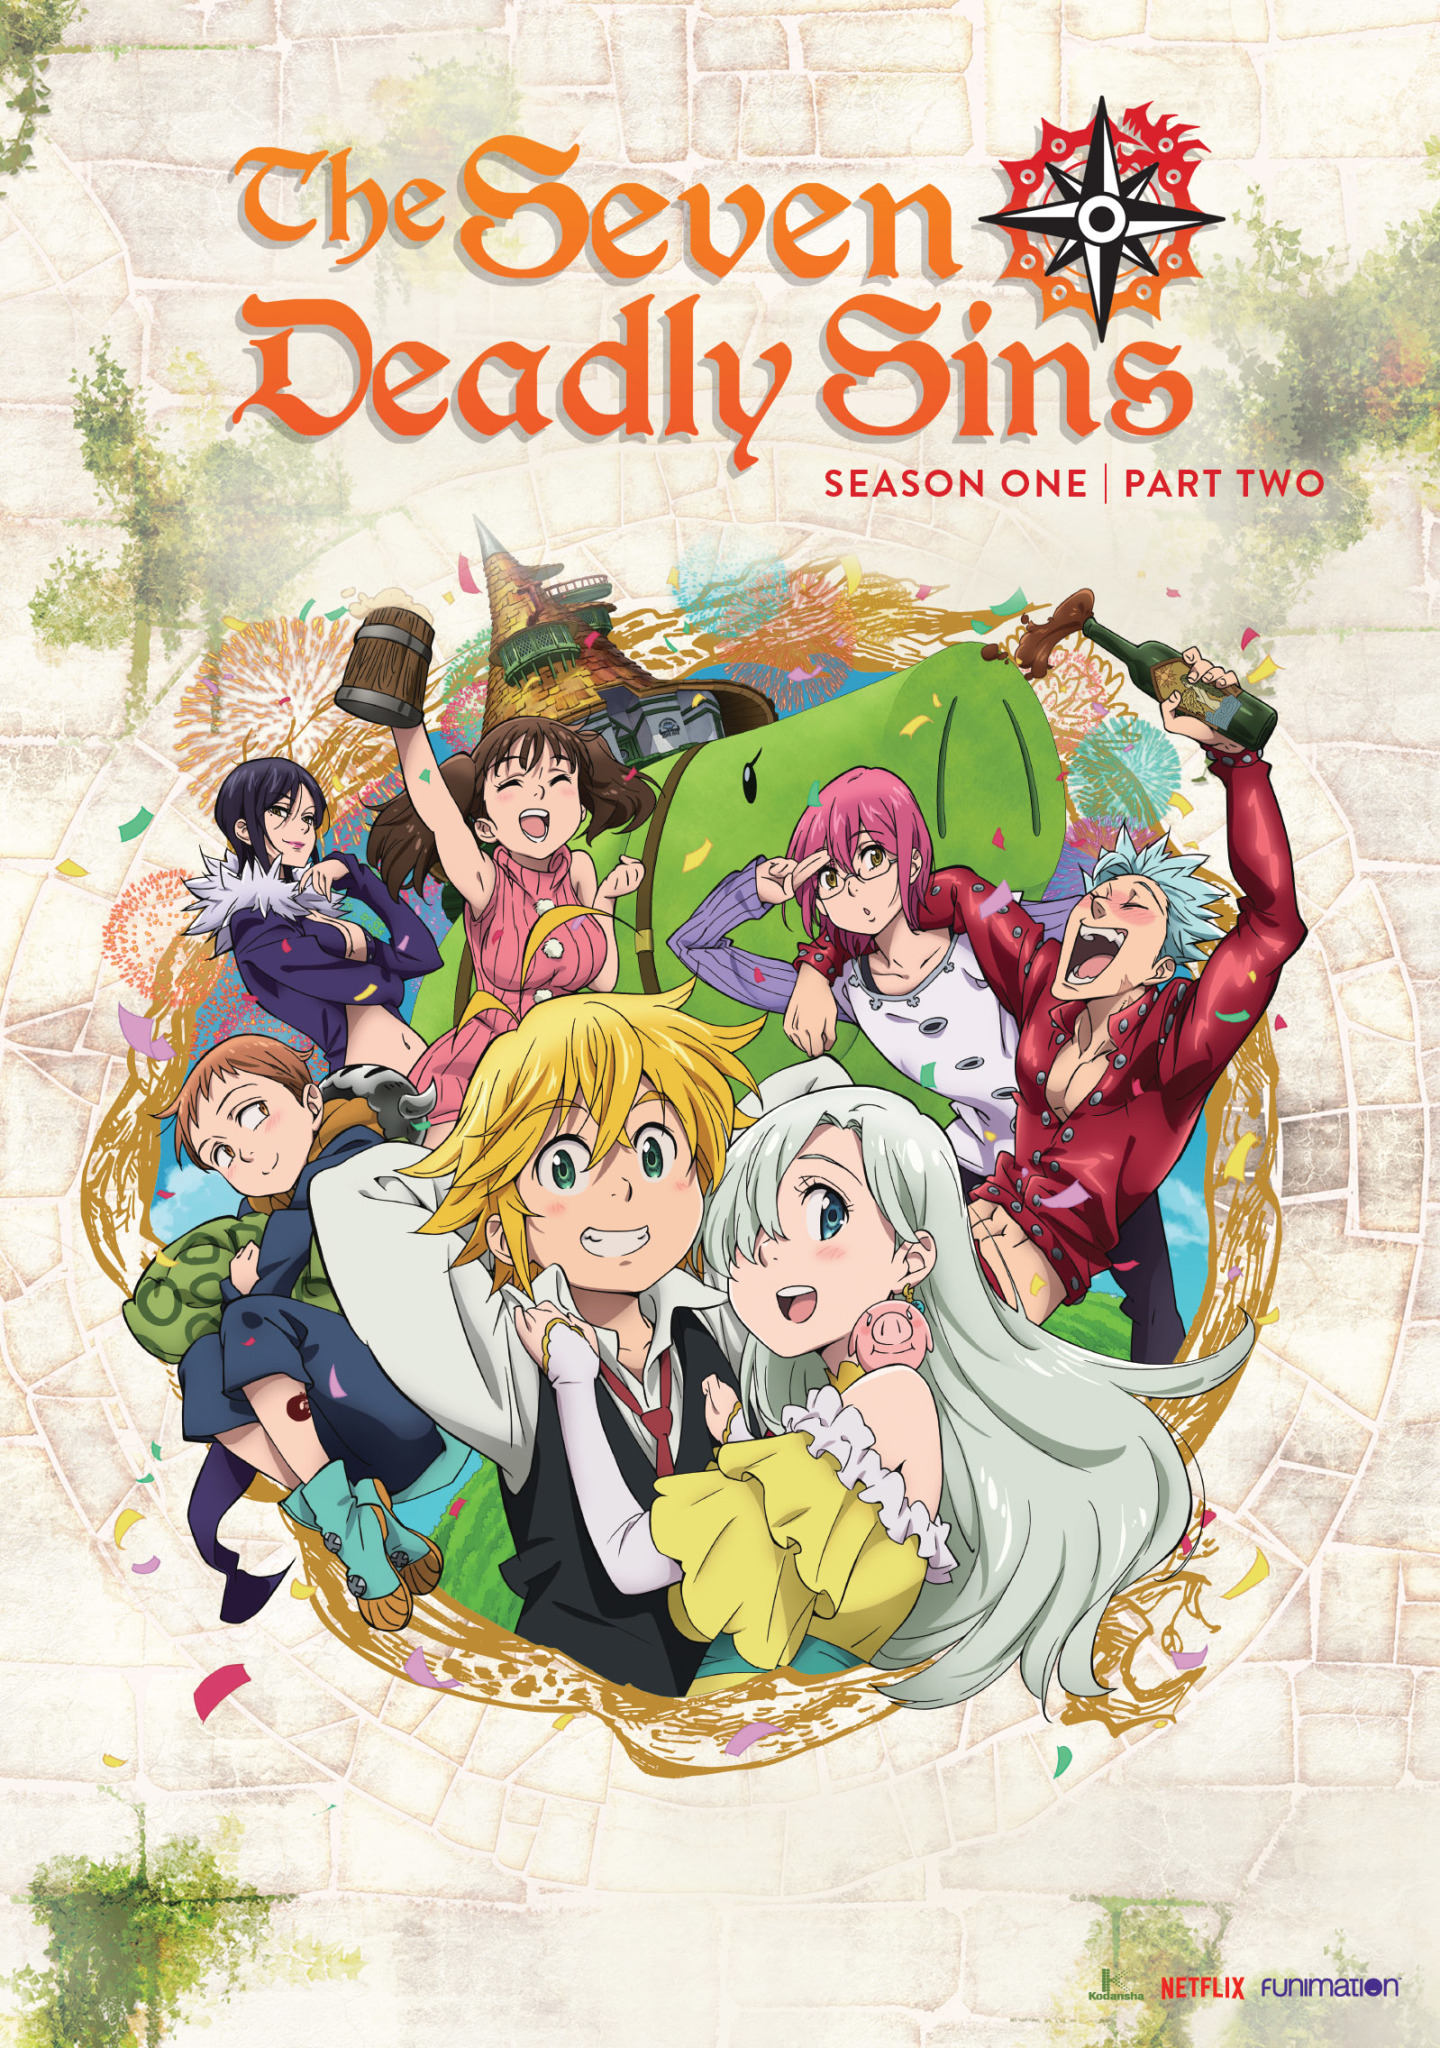 Crunchyroll - The Seven Deadly Sins Anime to Get Wrath of